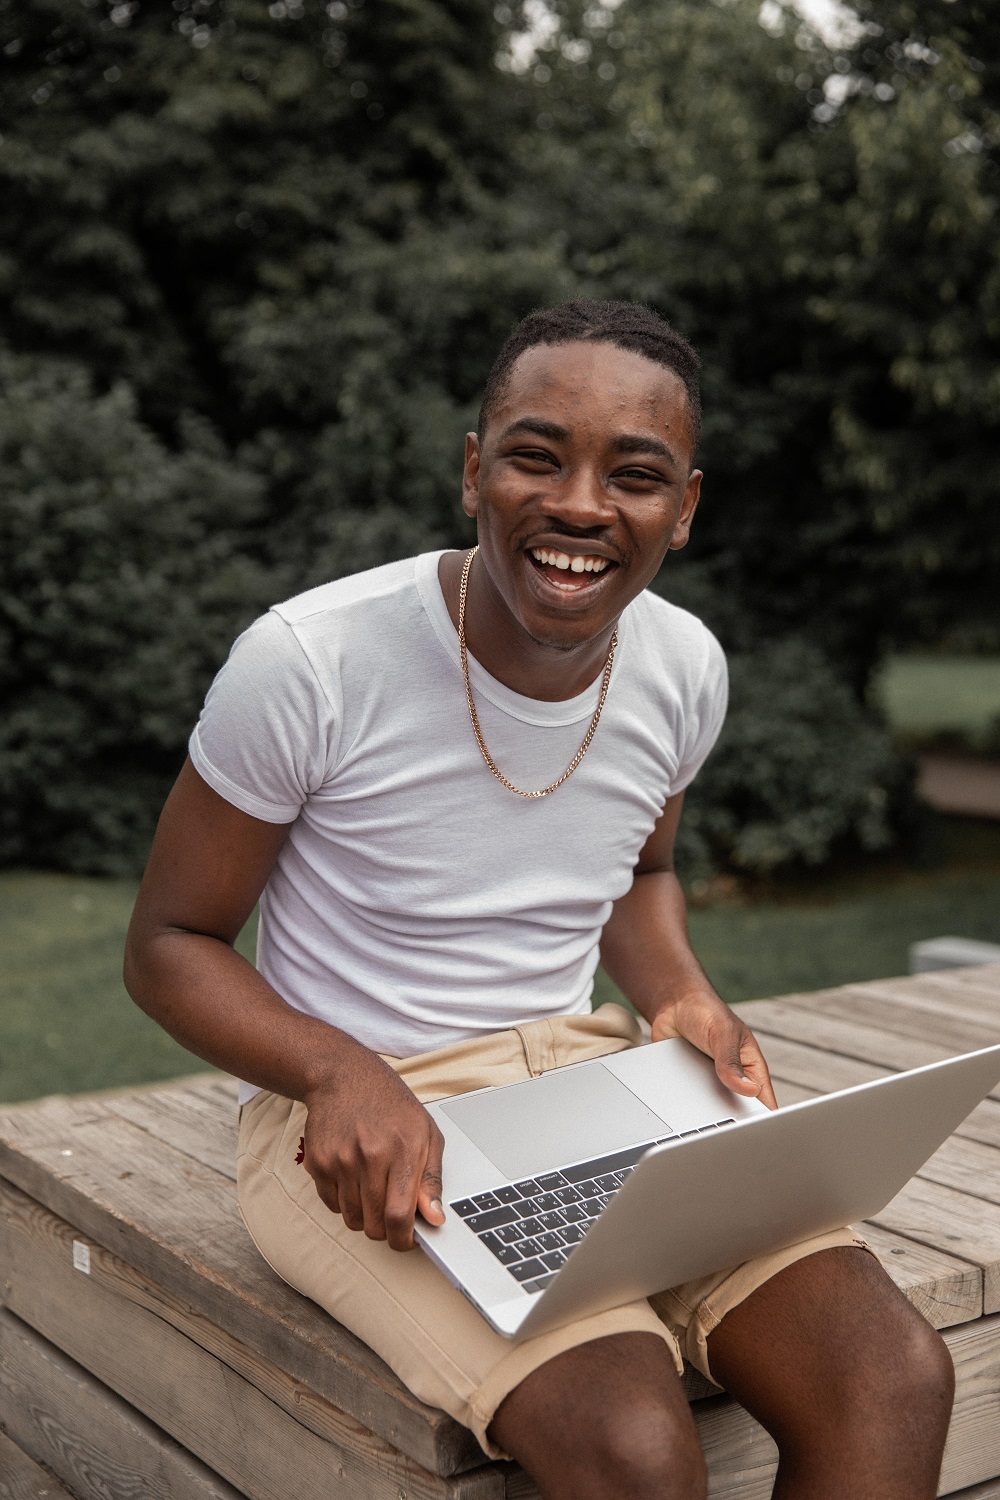 guy smiling with a laptop